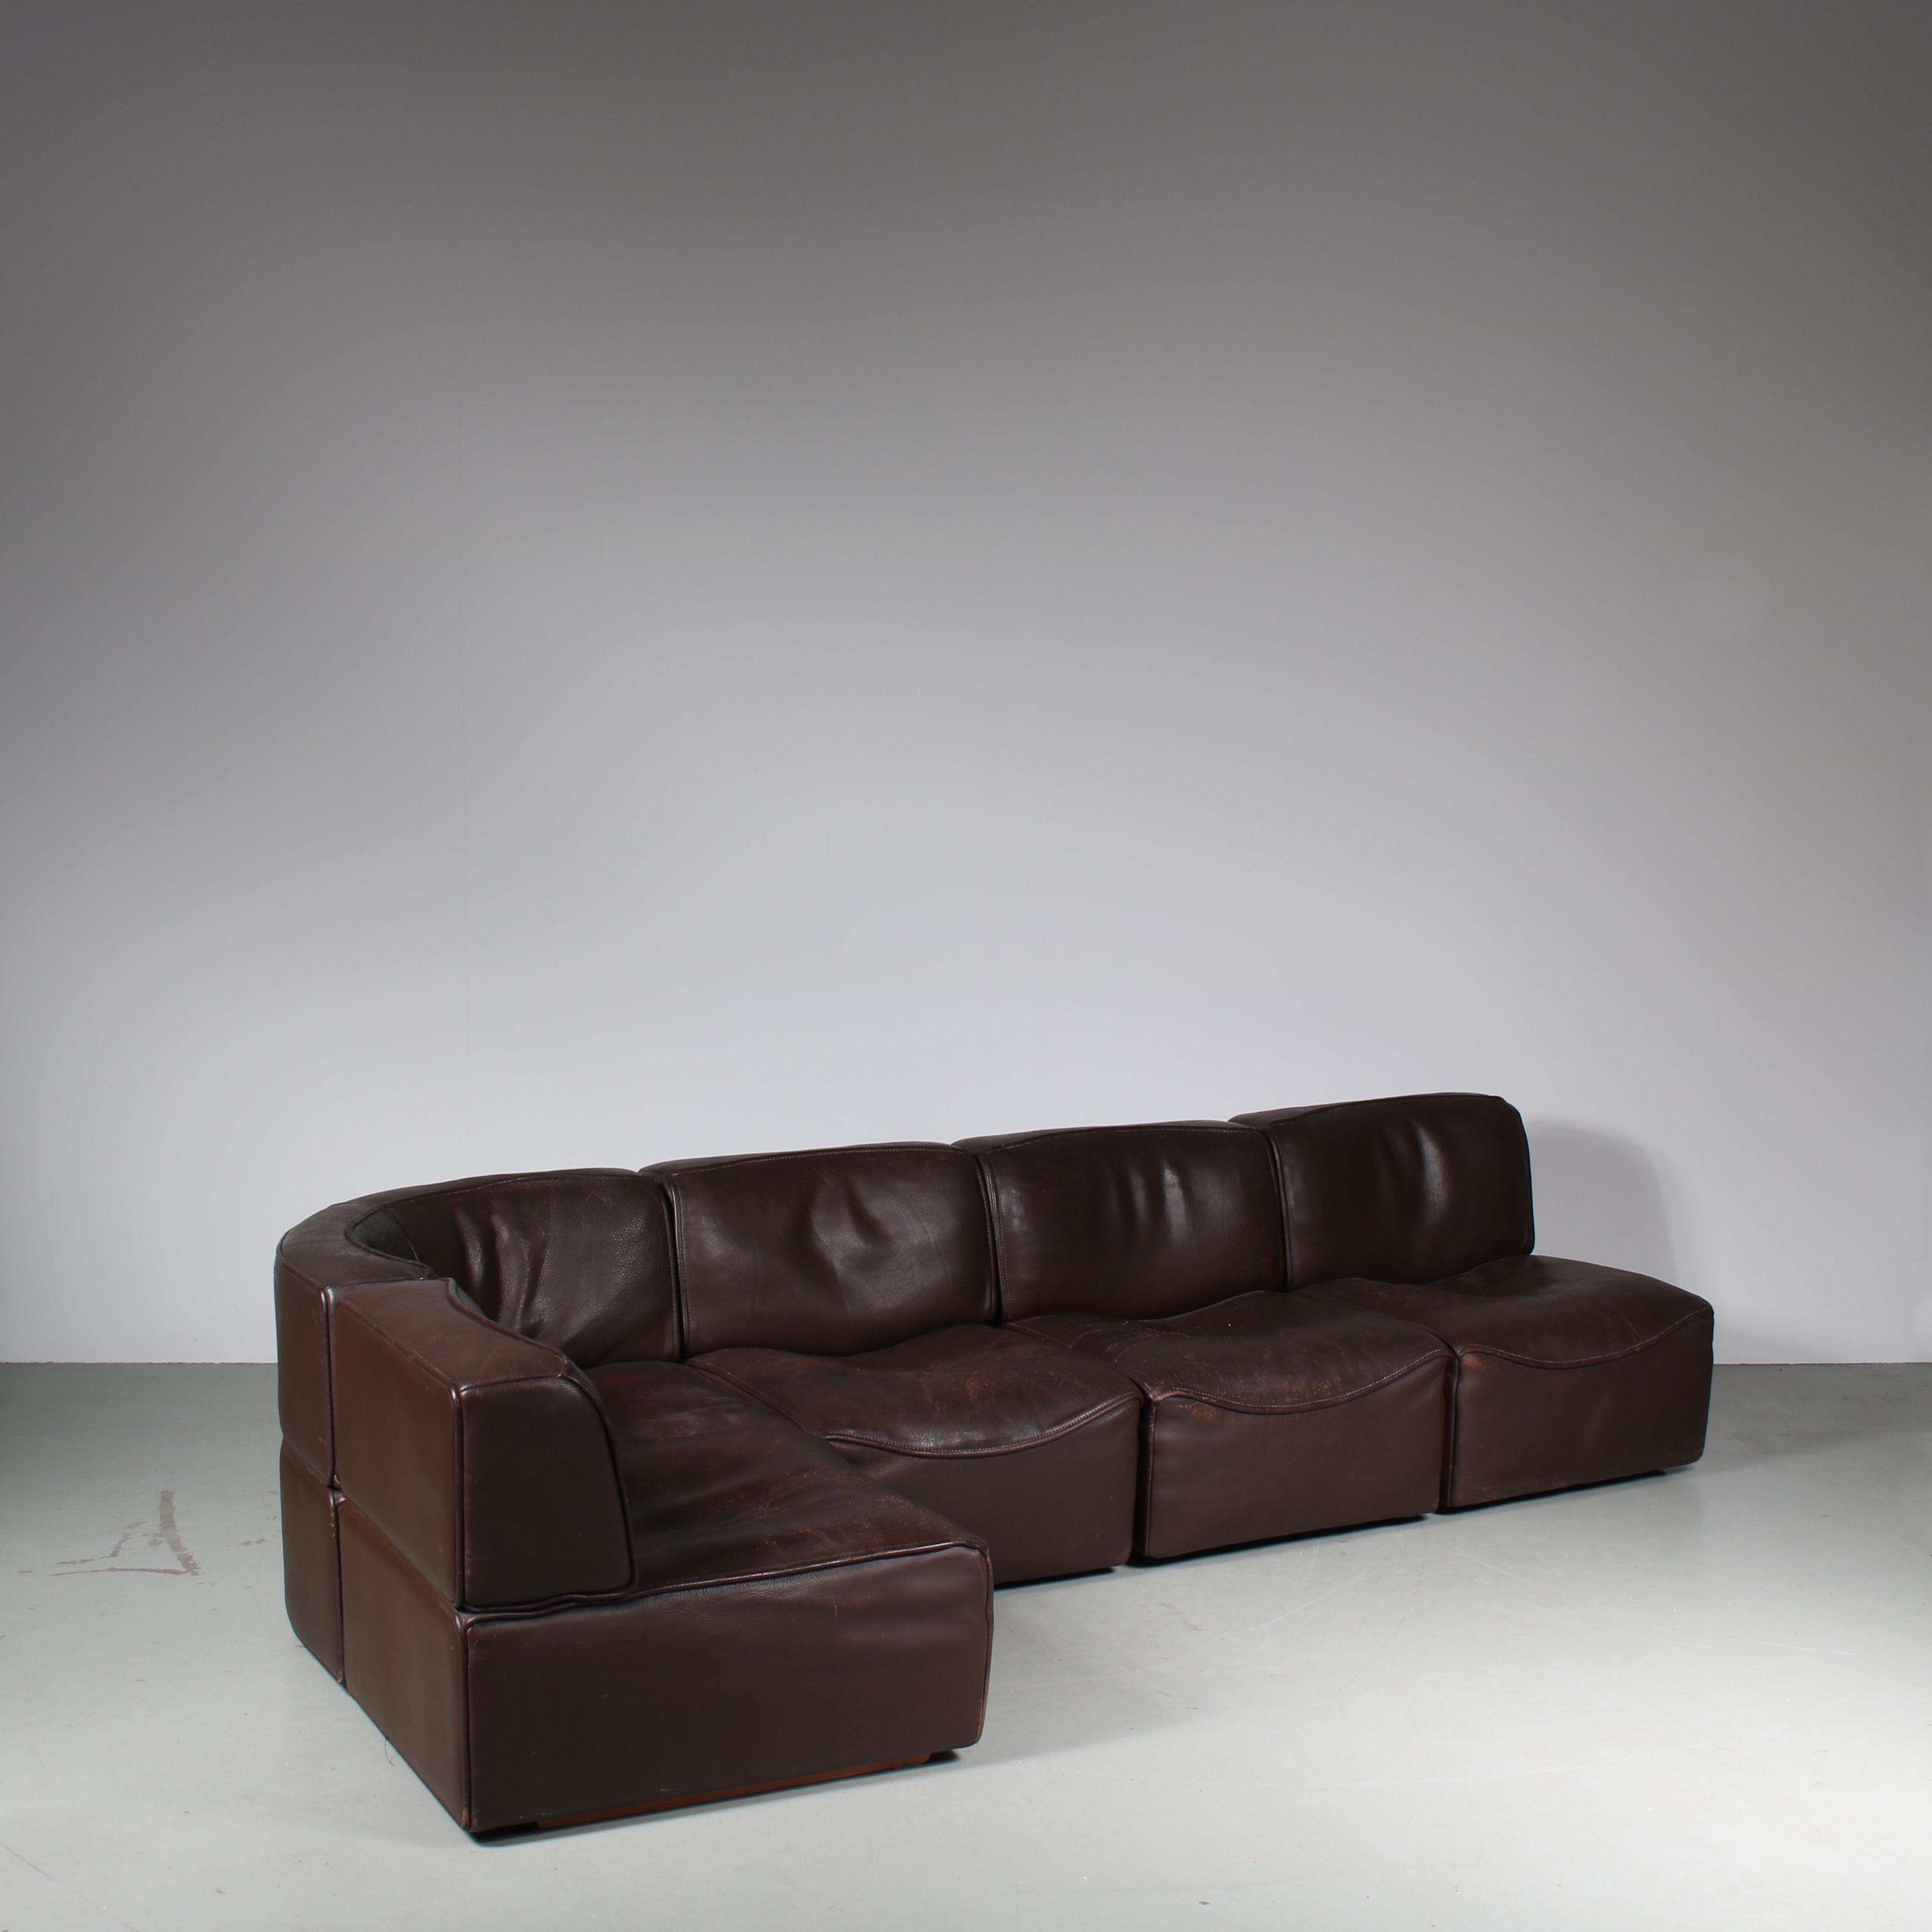 A fantastic sofa, model “DS15”, manufactured by De Sede in Switzerland around 1970.

This iconic Swiss sofa is made of the highest quality thick neck leather in a beautiful warm brown colour. Manufacturer De Sede is famous for their impressive